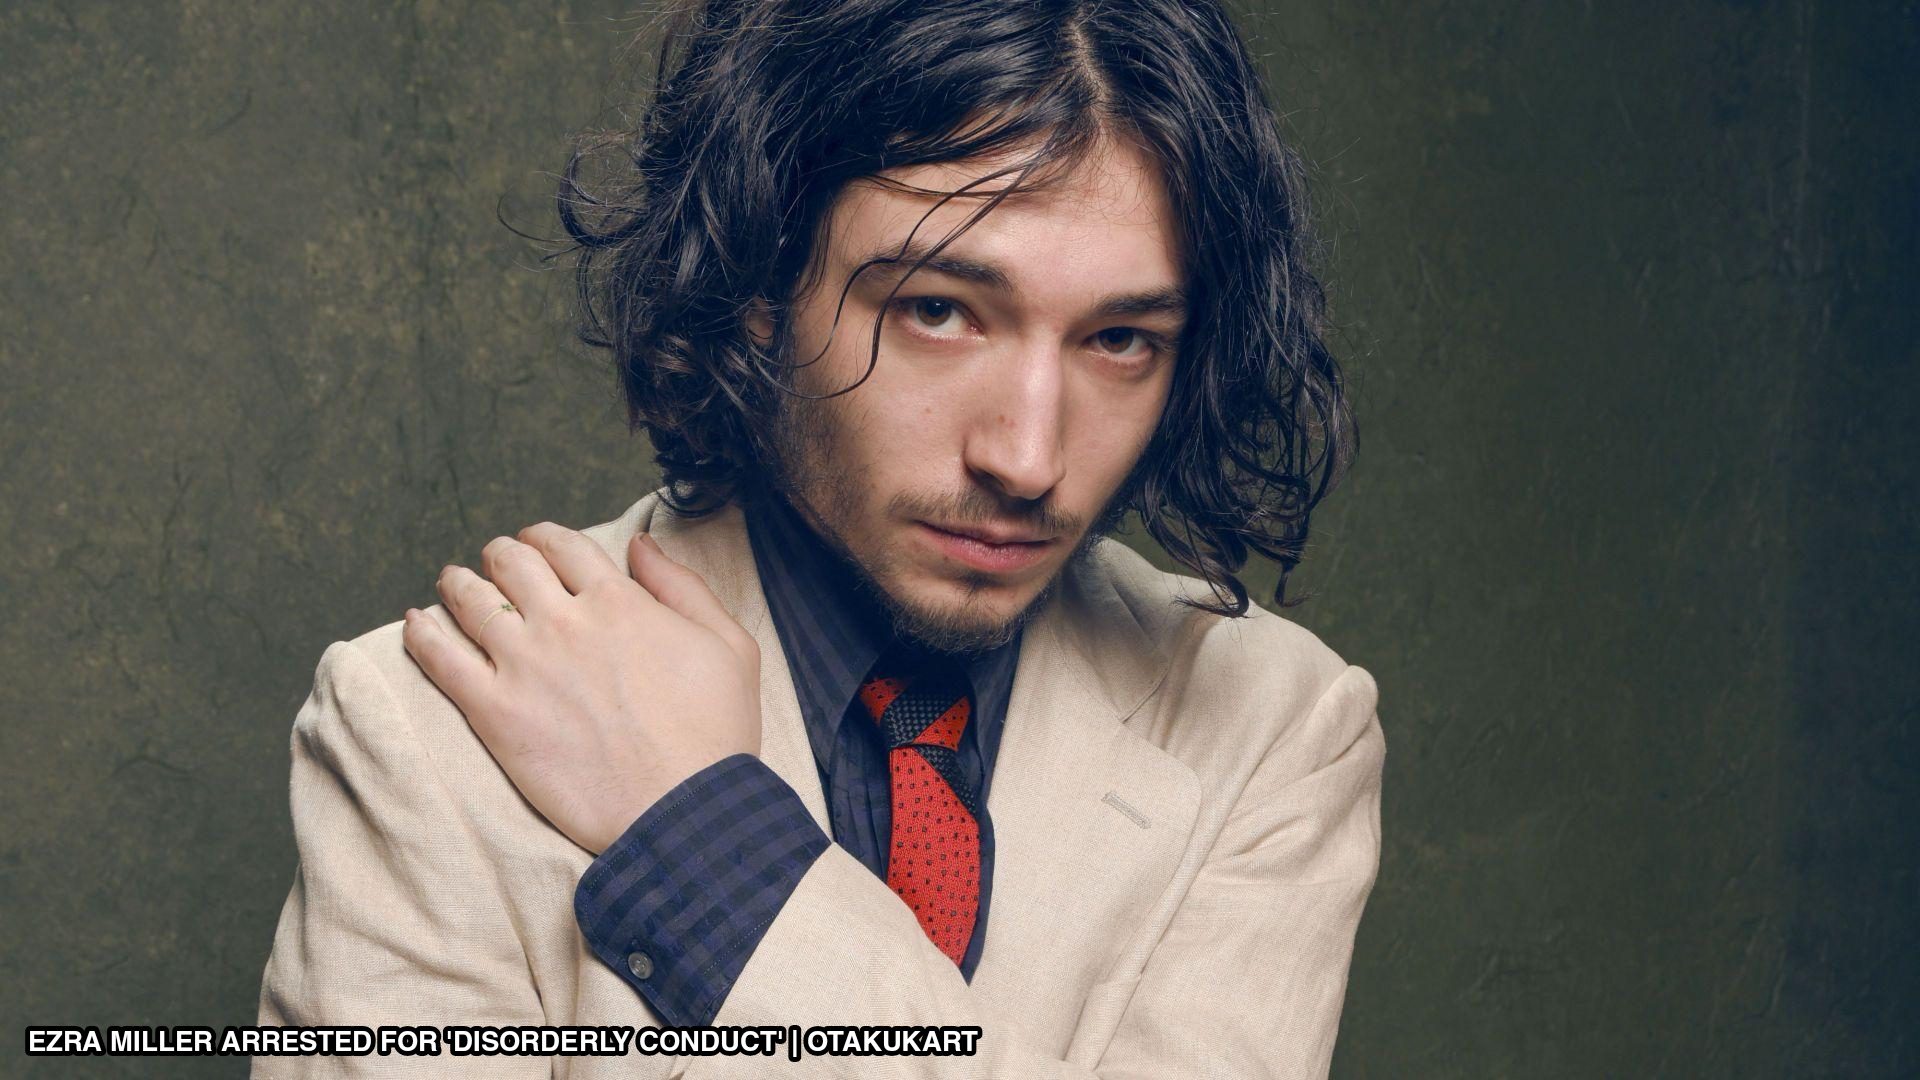 Ezra Miller Arrested For Disorderly Conduct